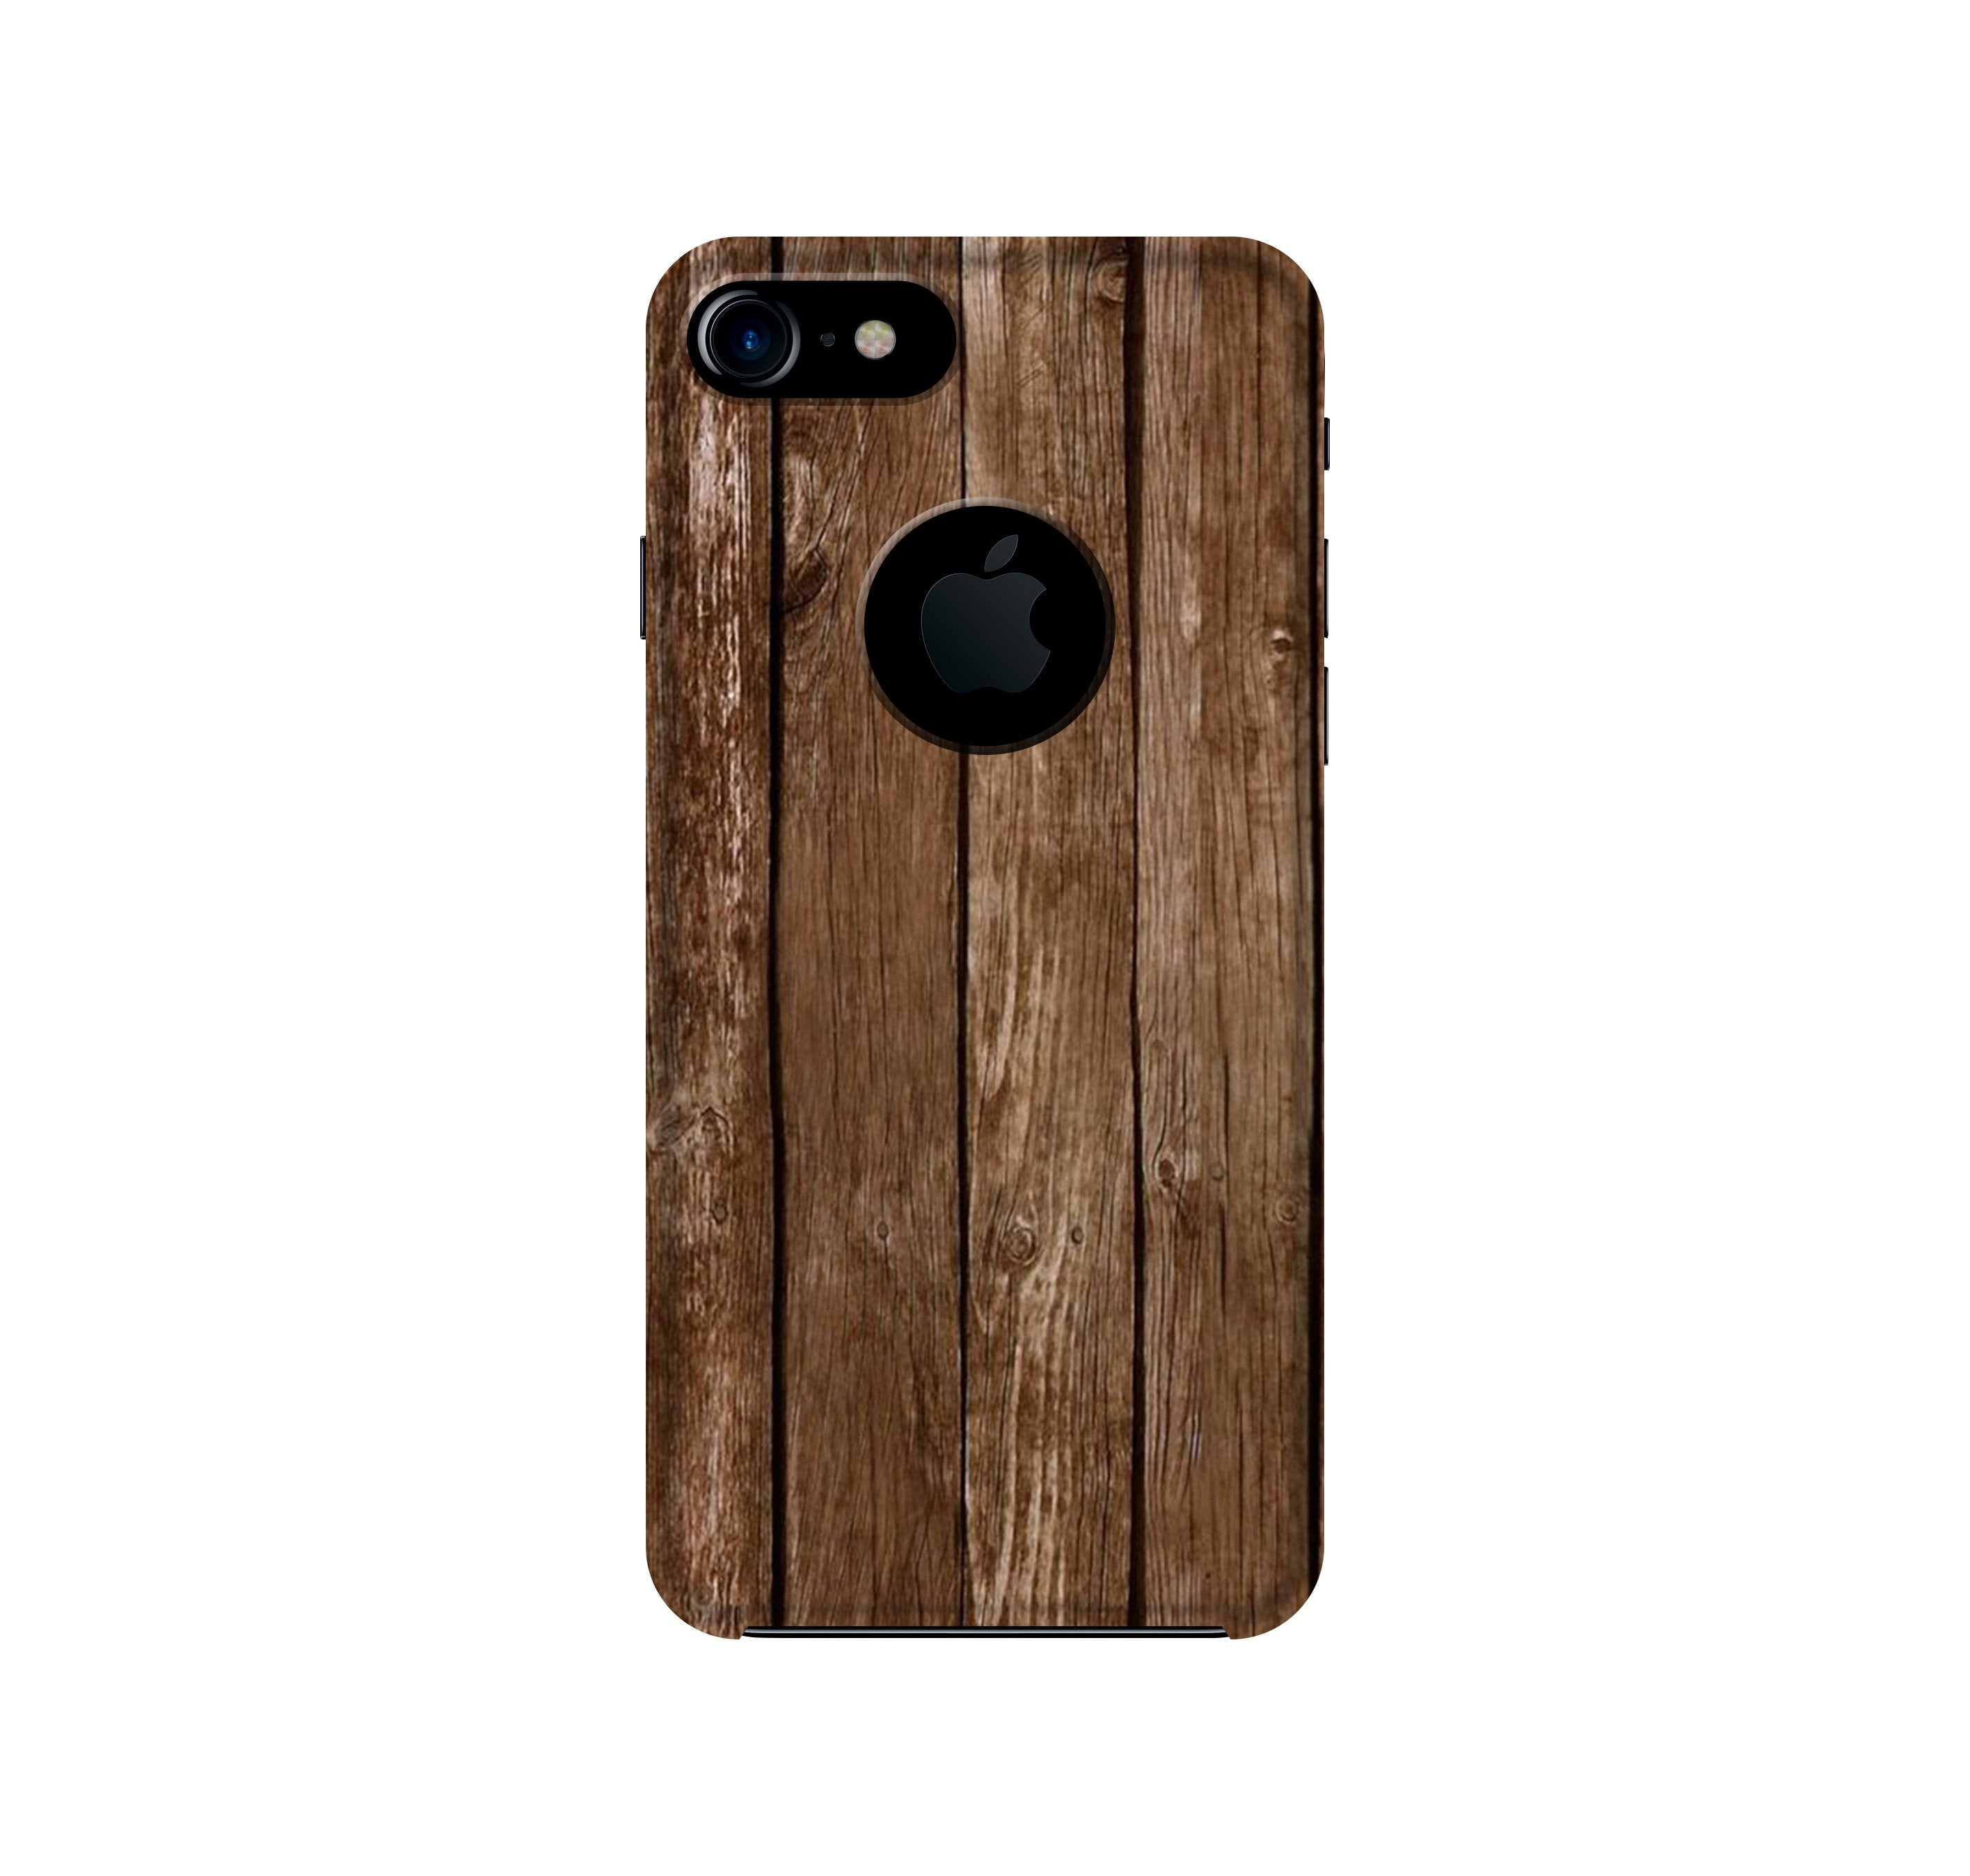 Wooden Look Case for iPhone 7 logo cut(Design - 112)